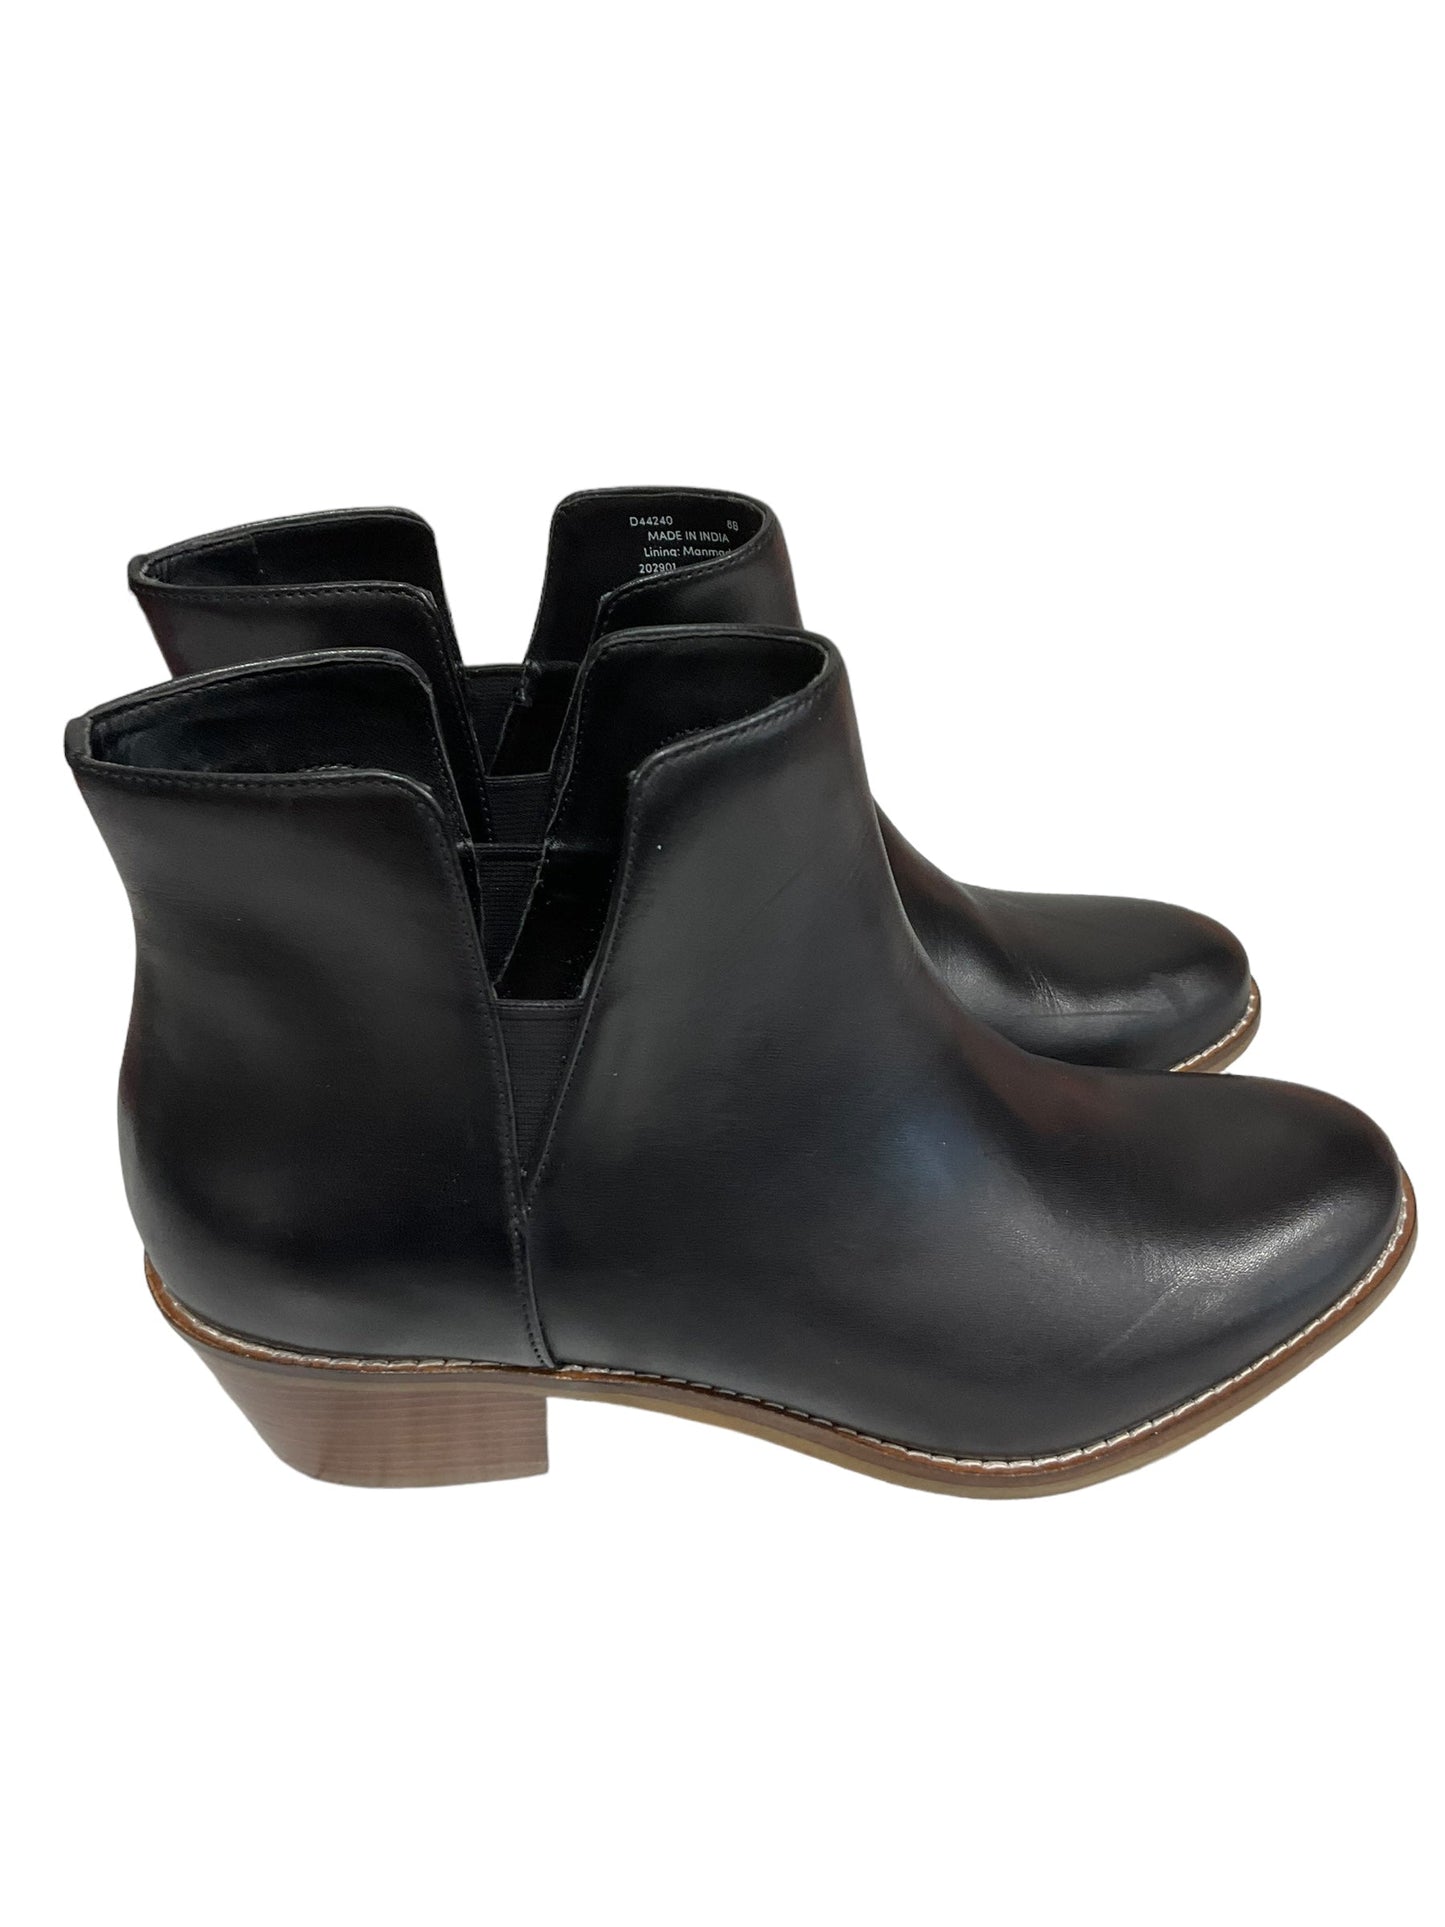 Black Boots Ankle Heels Cole-haan, Size 8